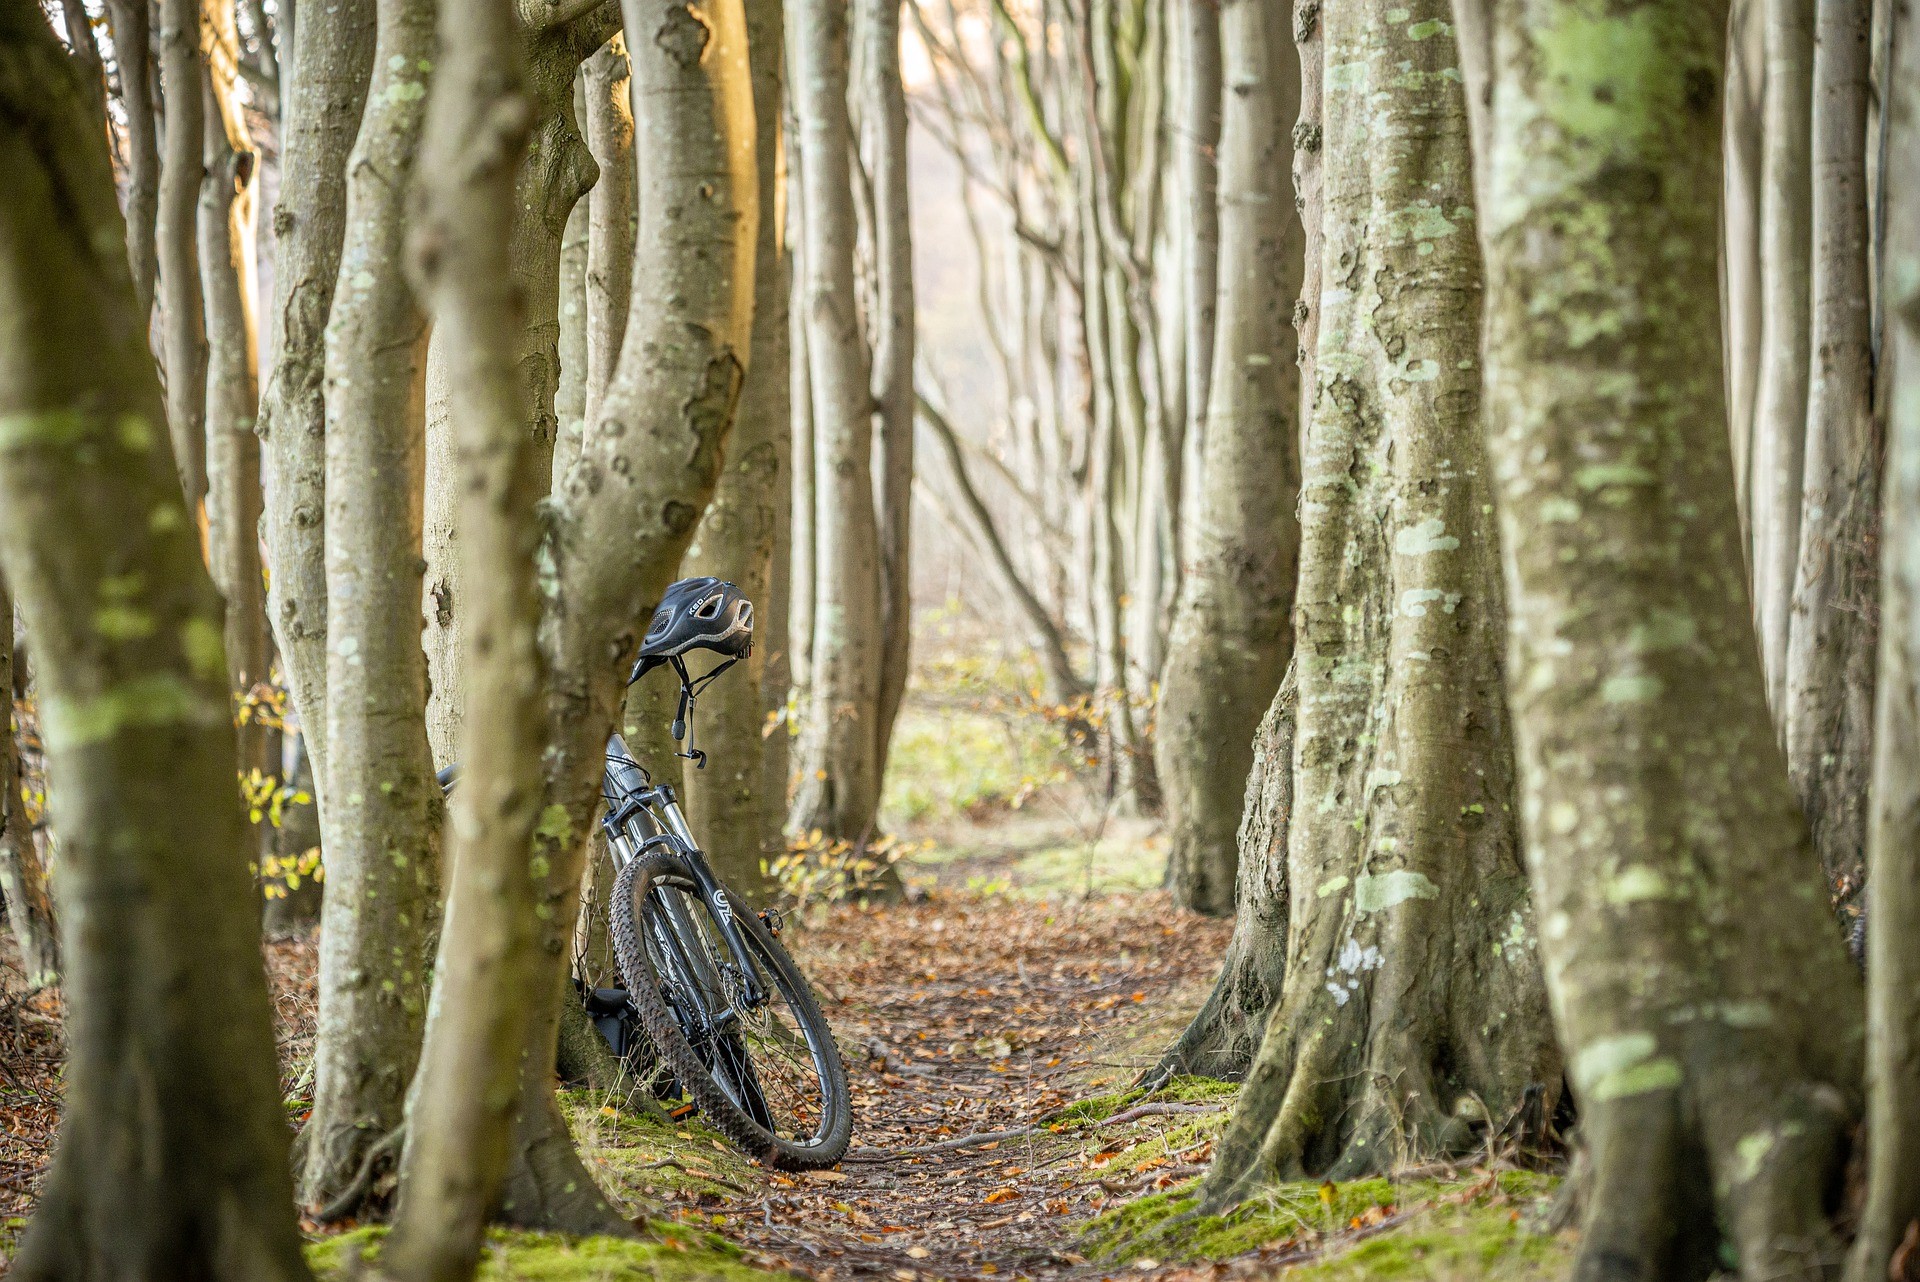 Bike Photo On The Forest